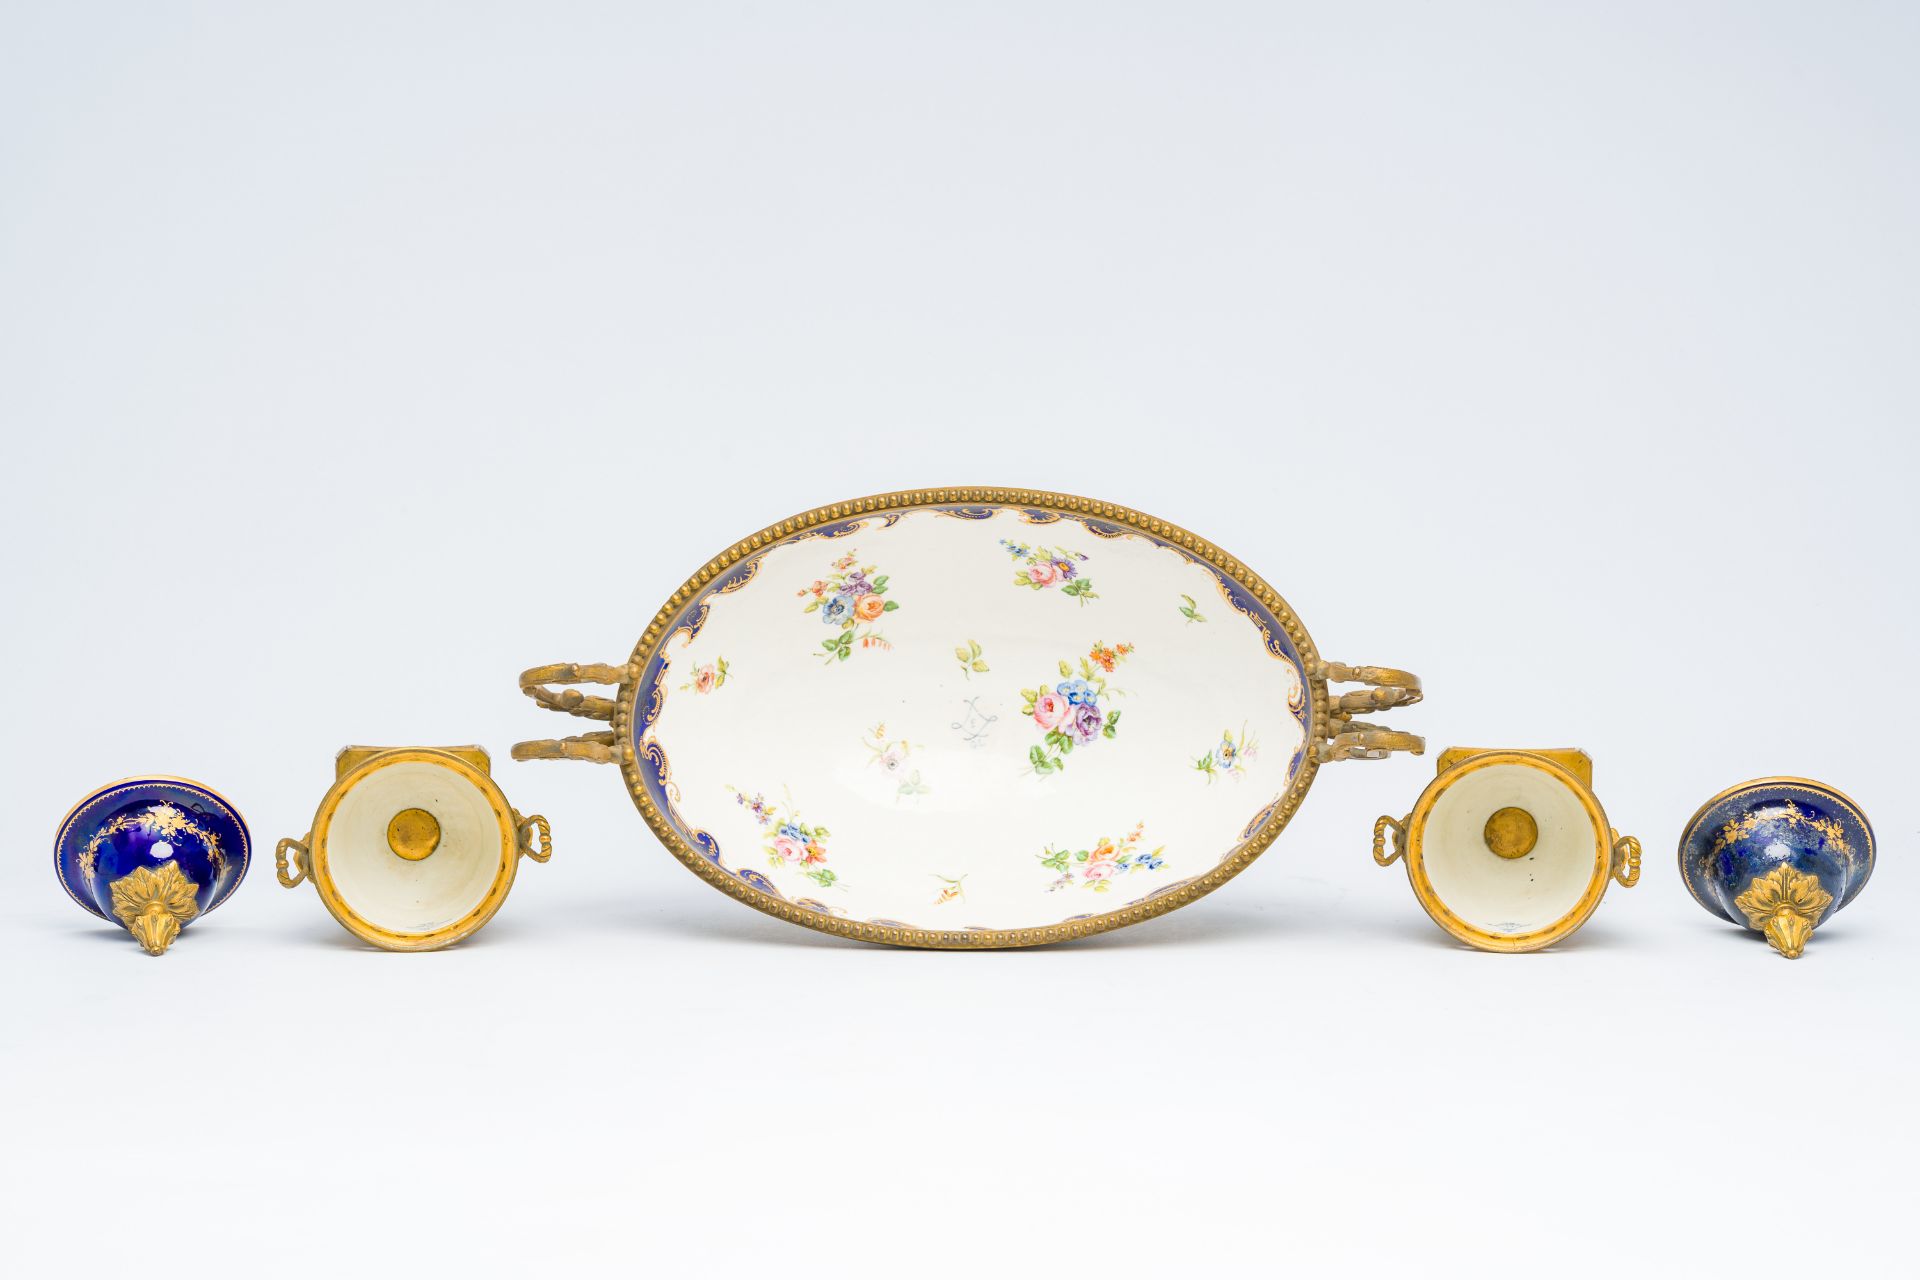 A three piece Sevres-style porcelain garniture with gilt bronze mounts, France, 19th C. - Image 5 of 7